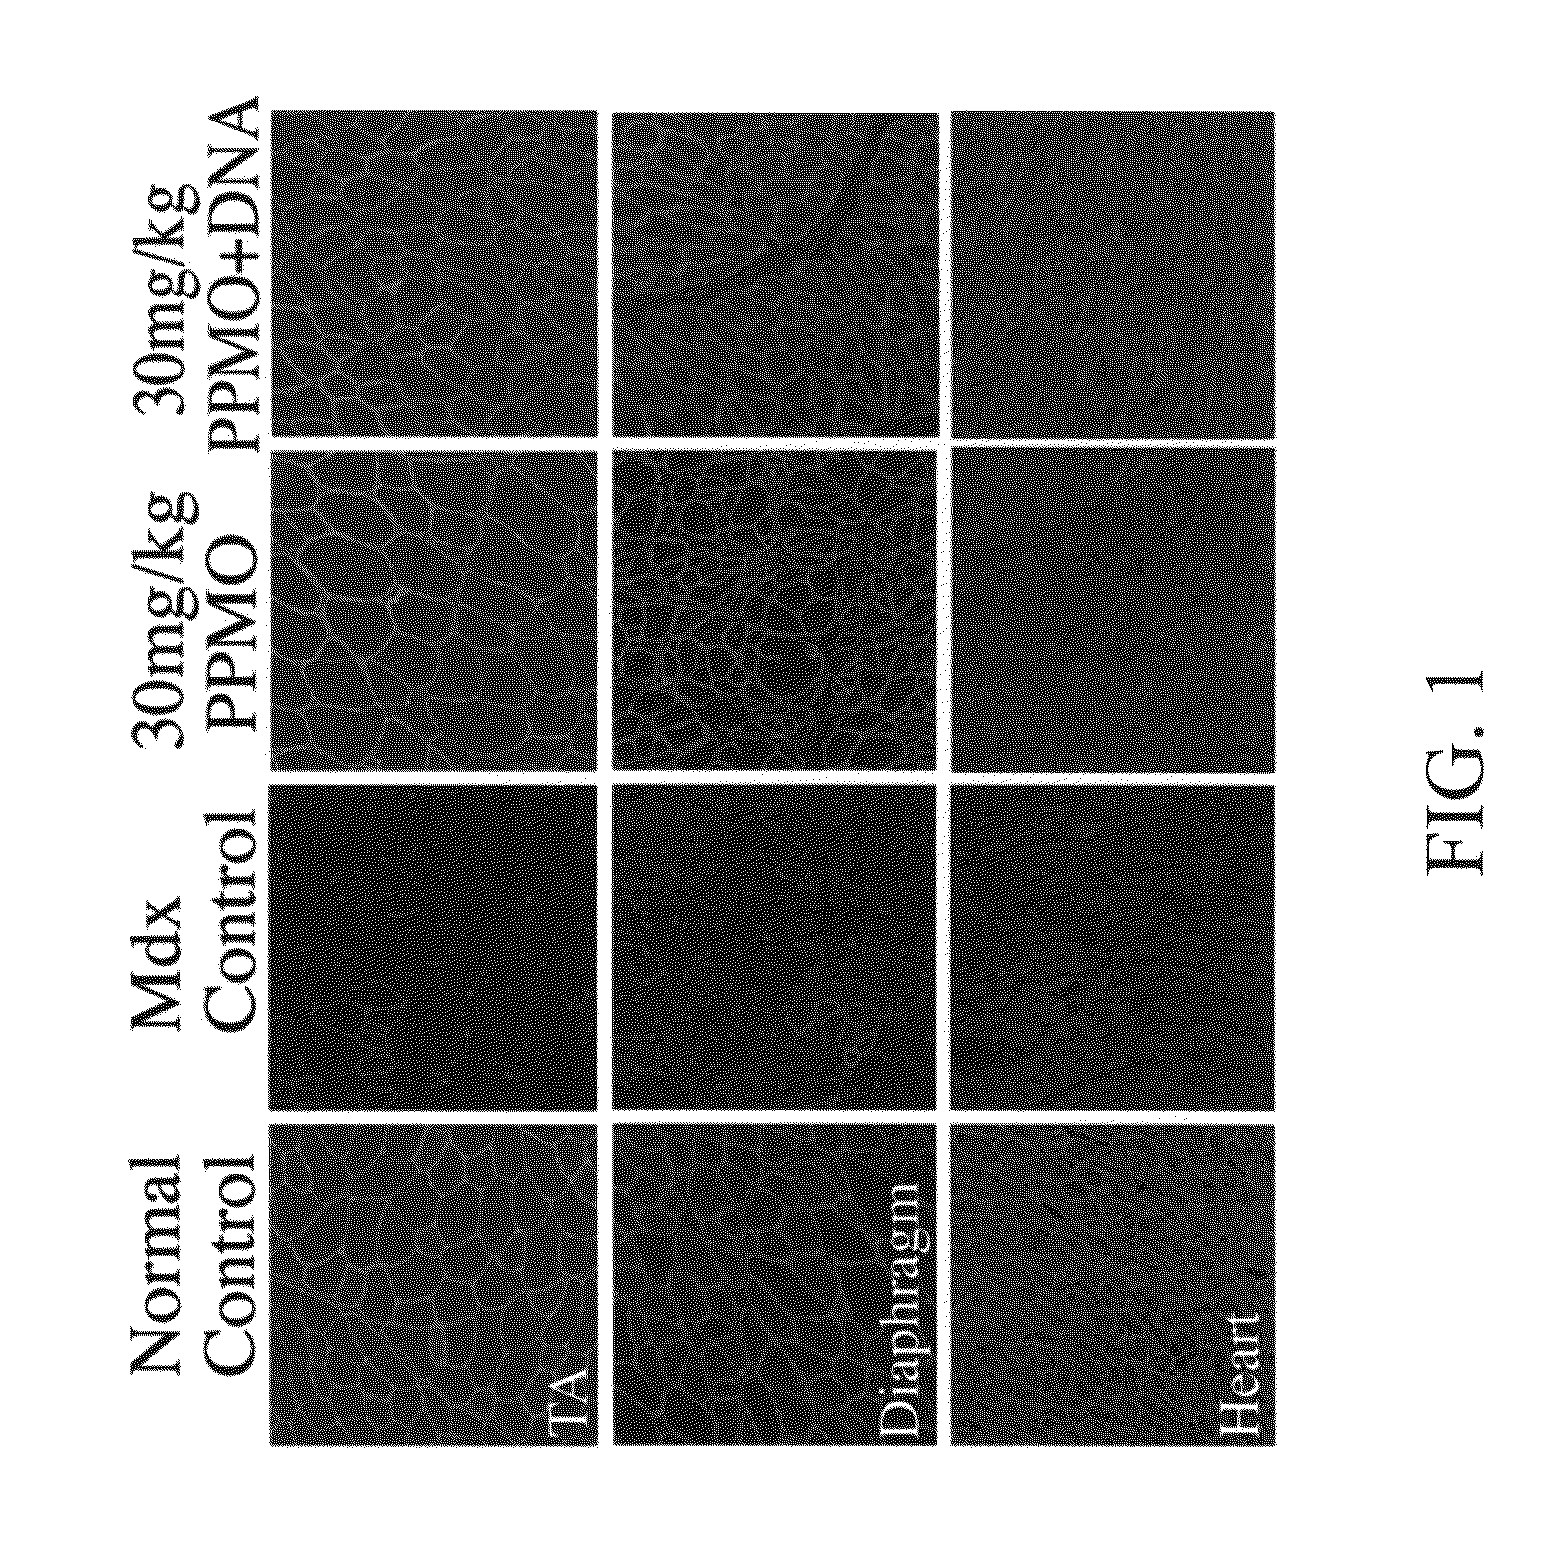 Pharmaceutical compositions comprising antisense oligonucleotides and methods of using same